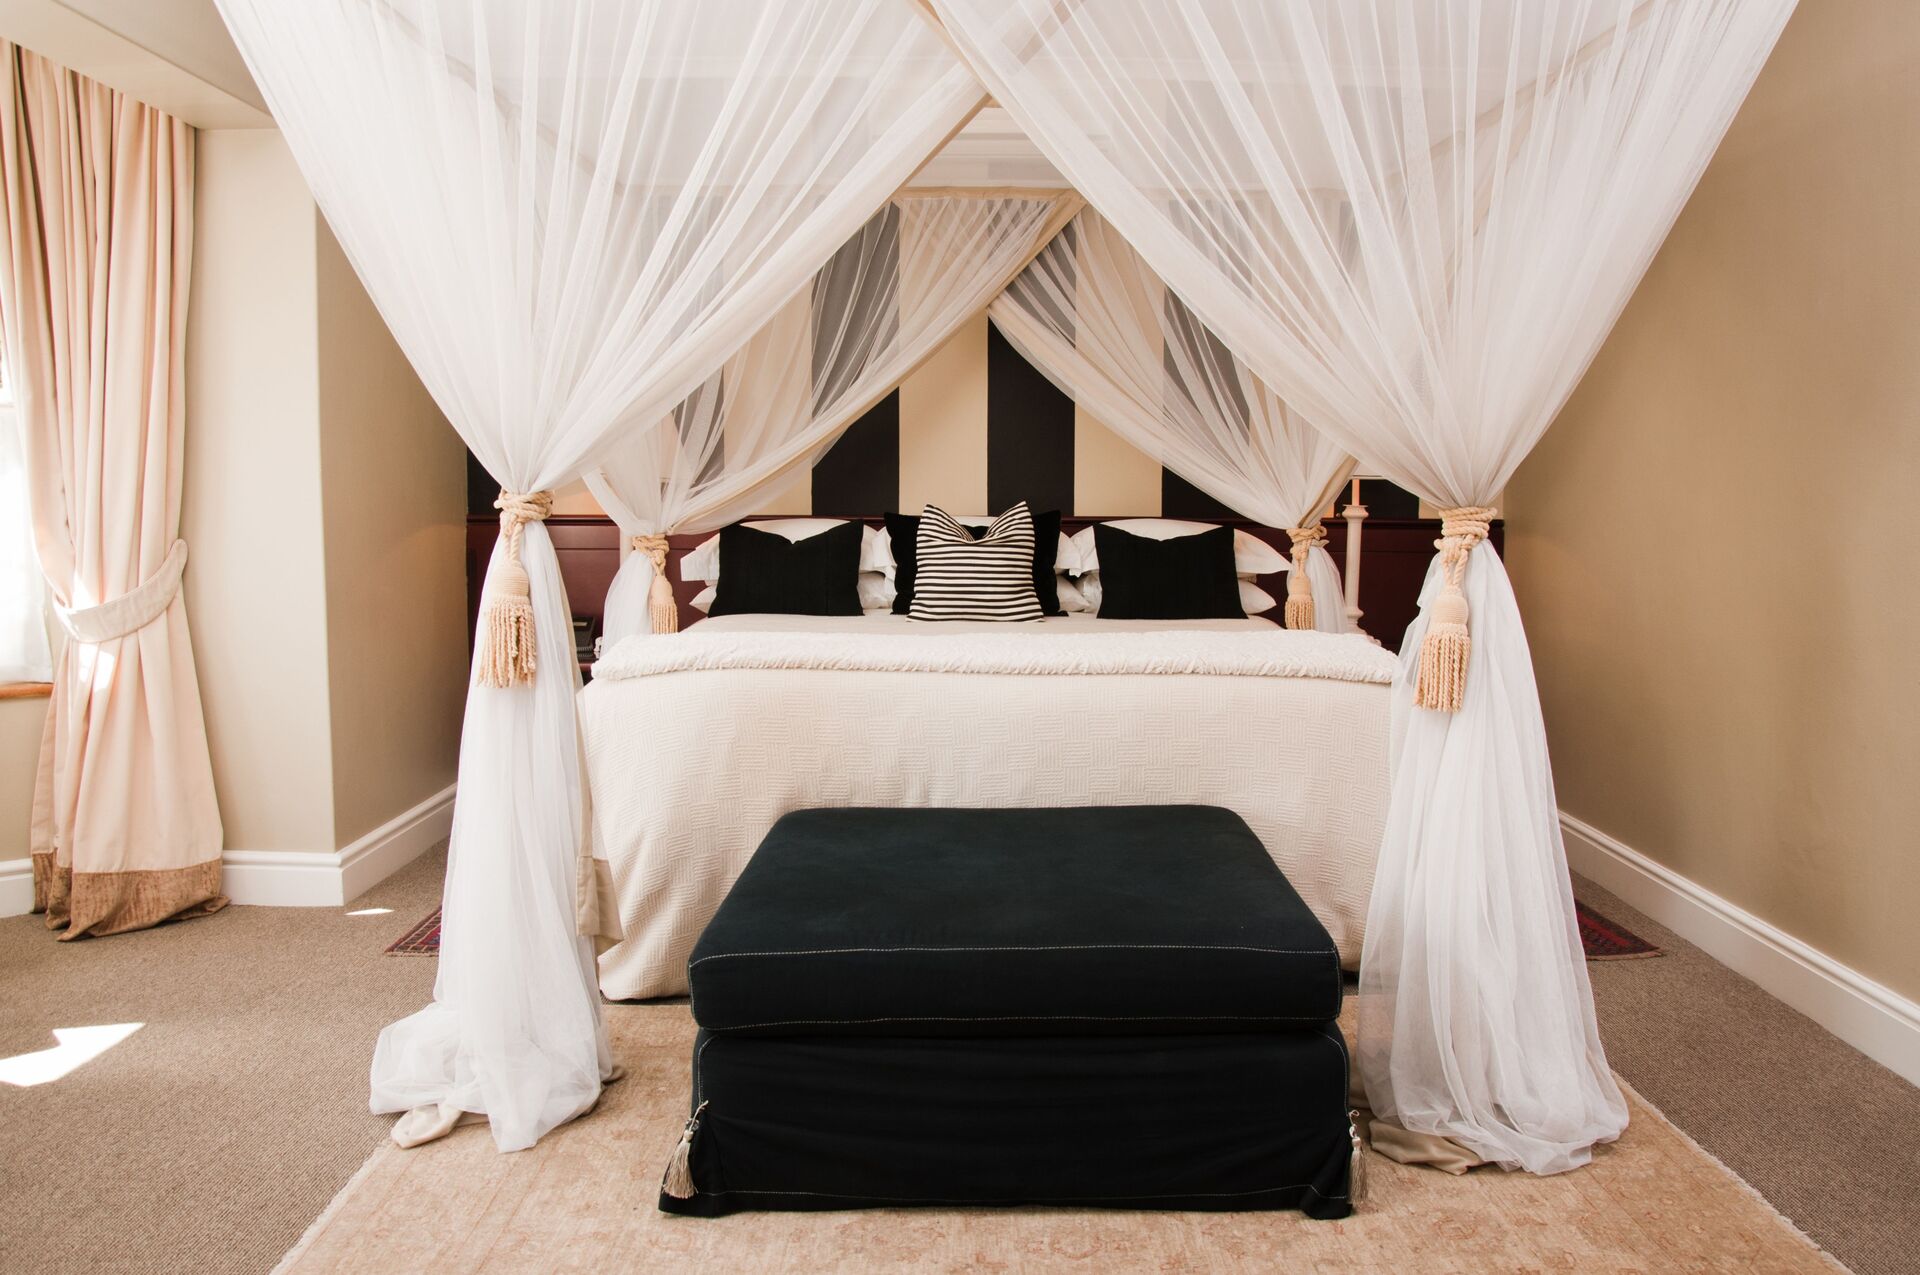 How To Make Four Poster Bed Drapes